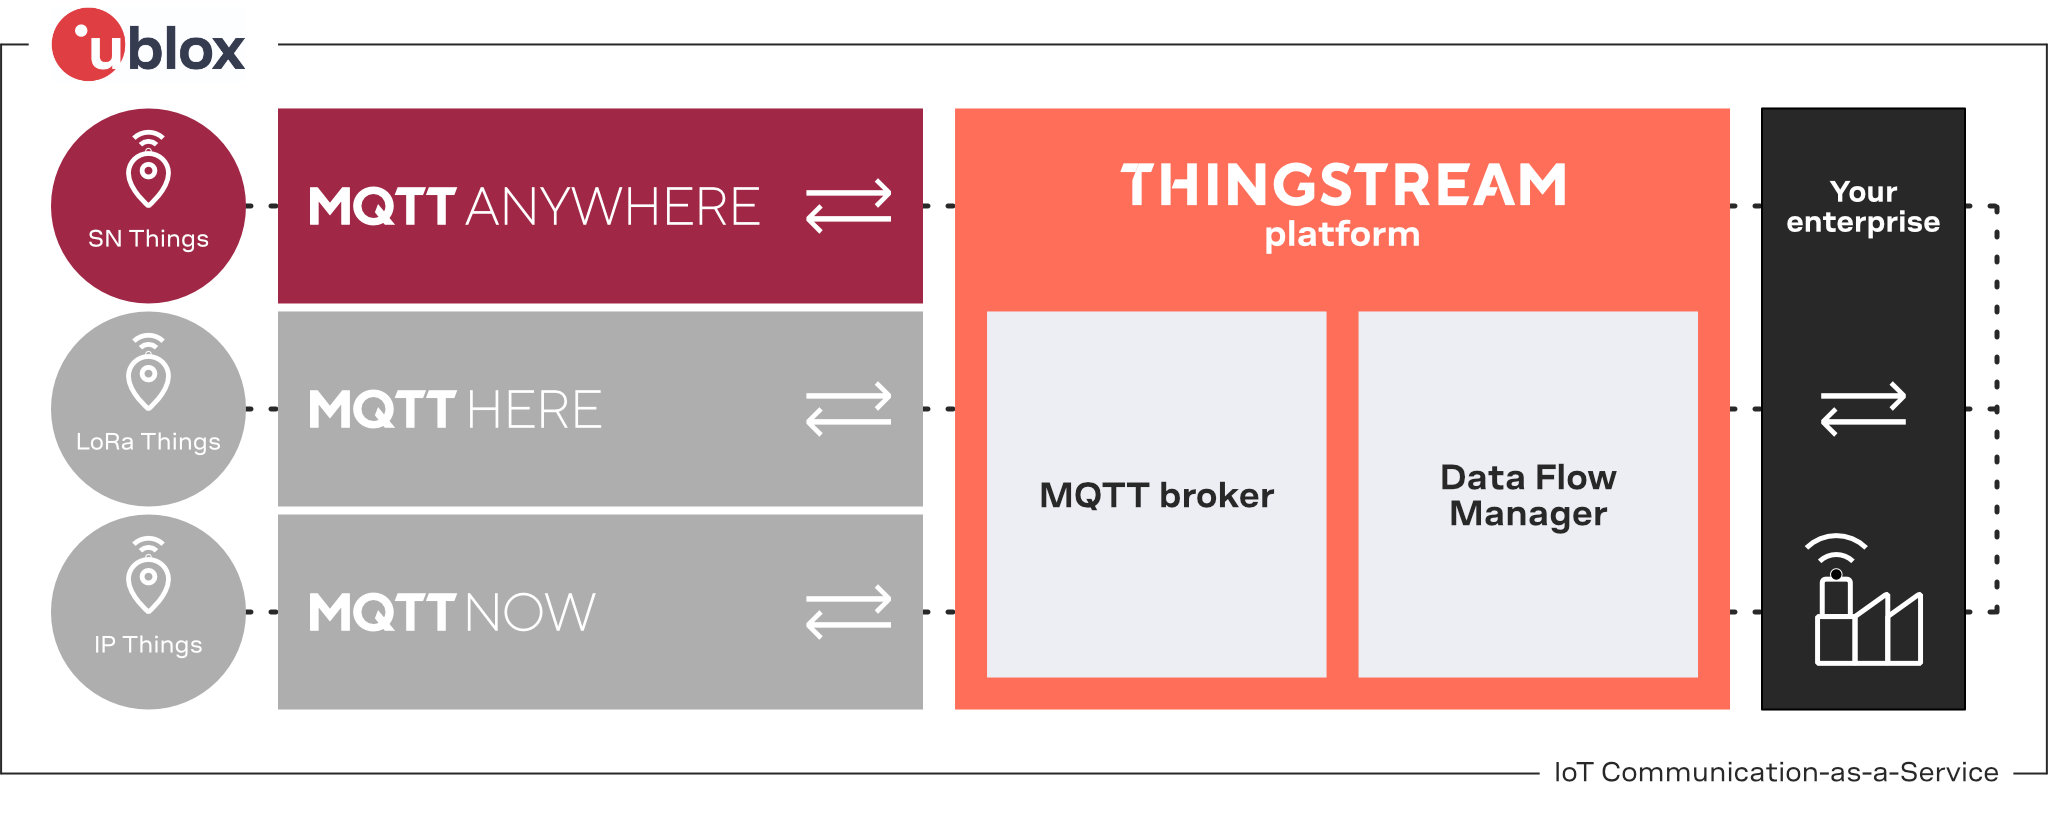 IoT Communication-as-a-Service MQTT Anywhere